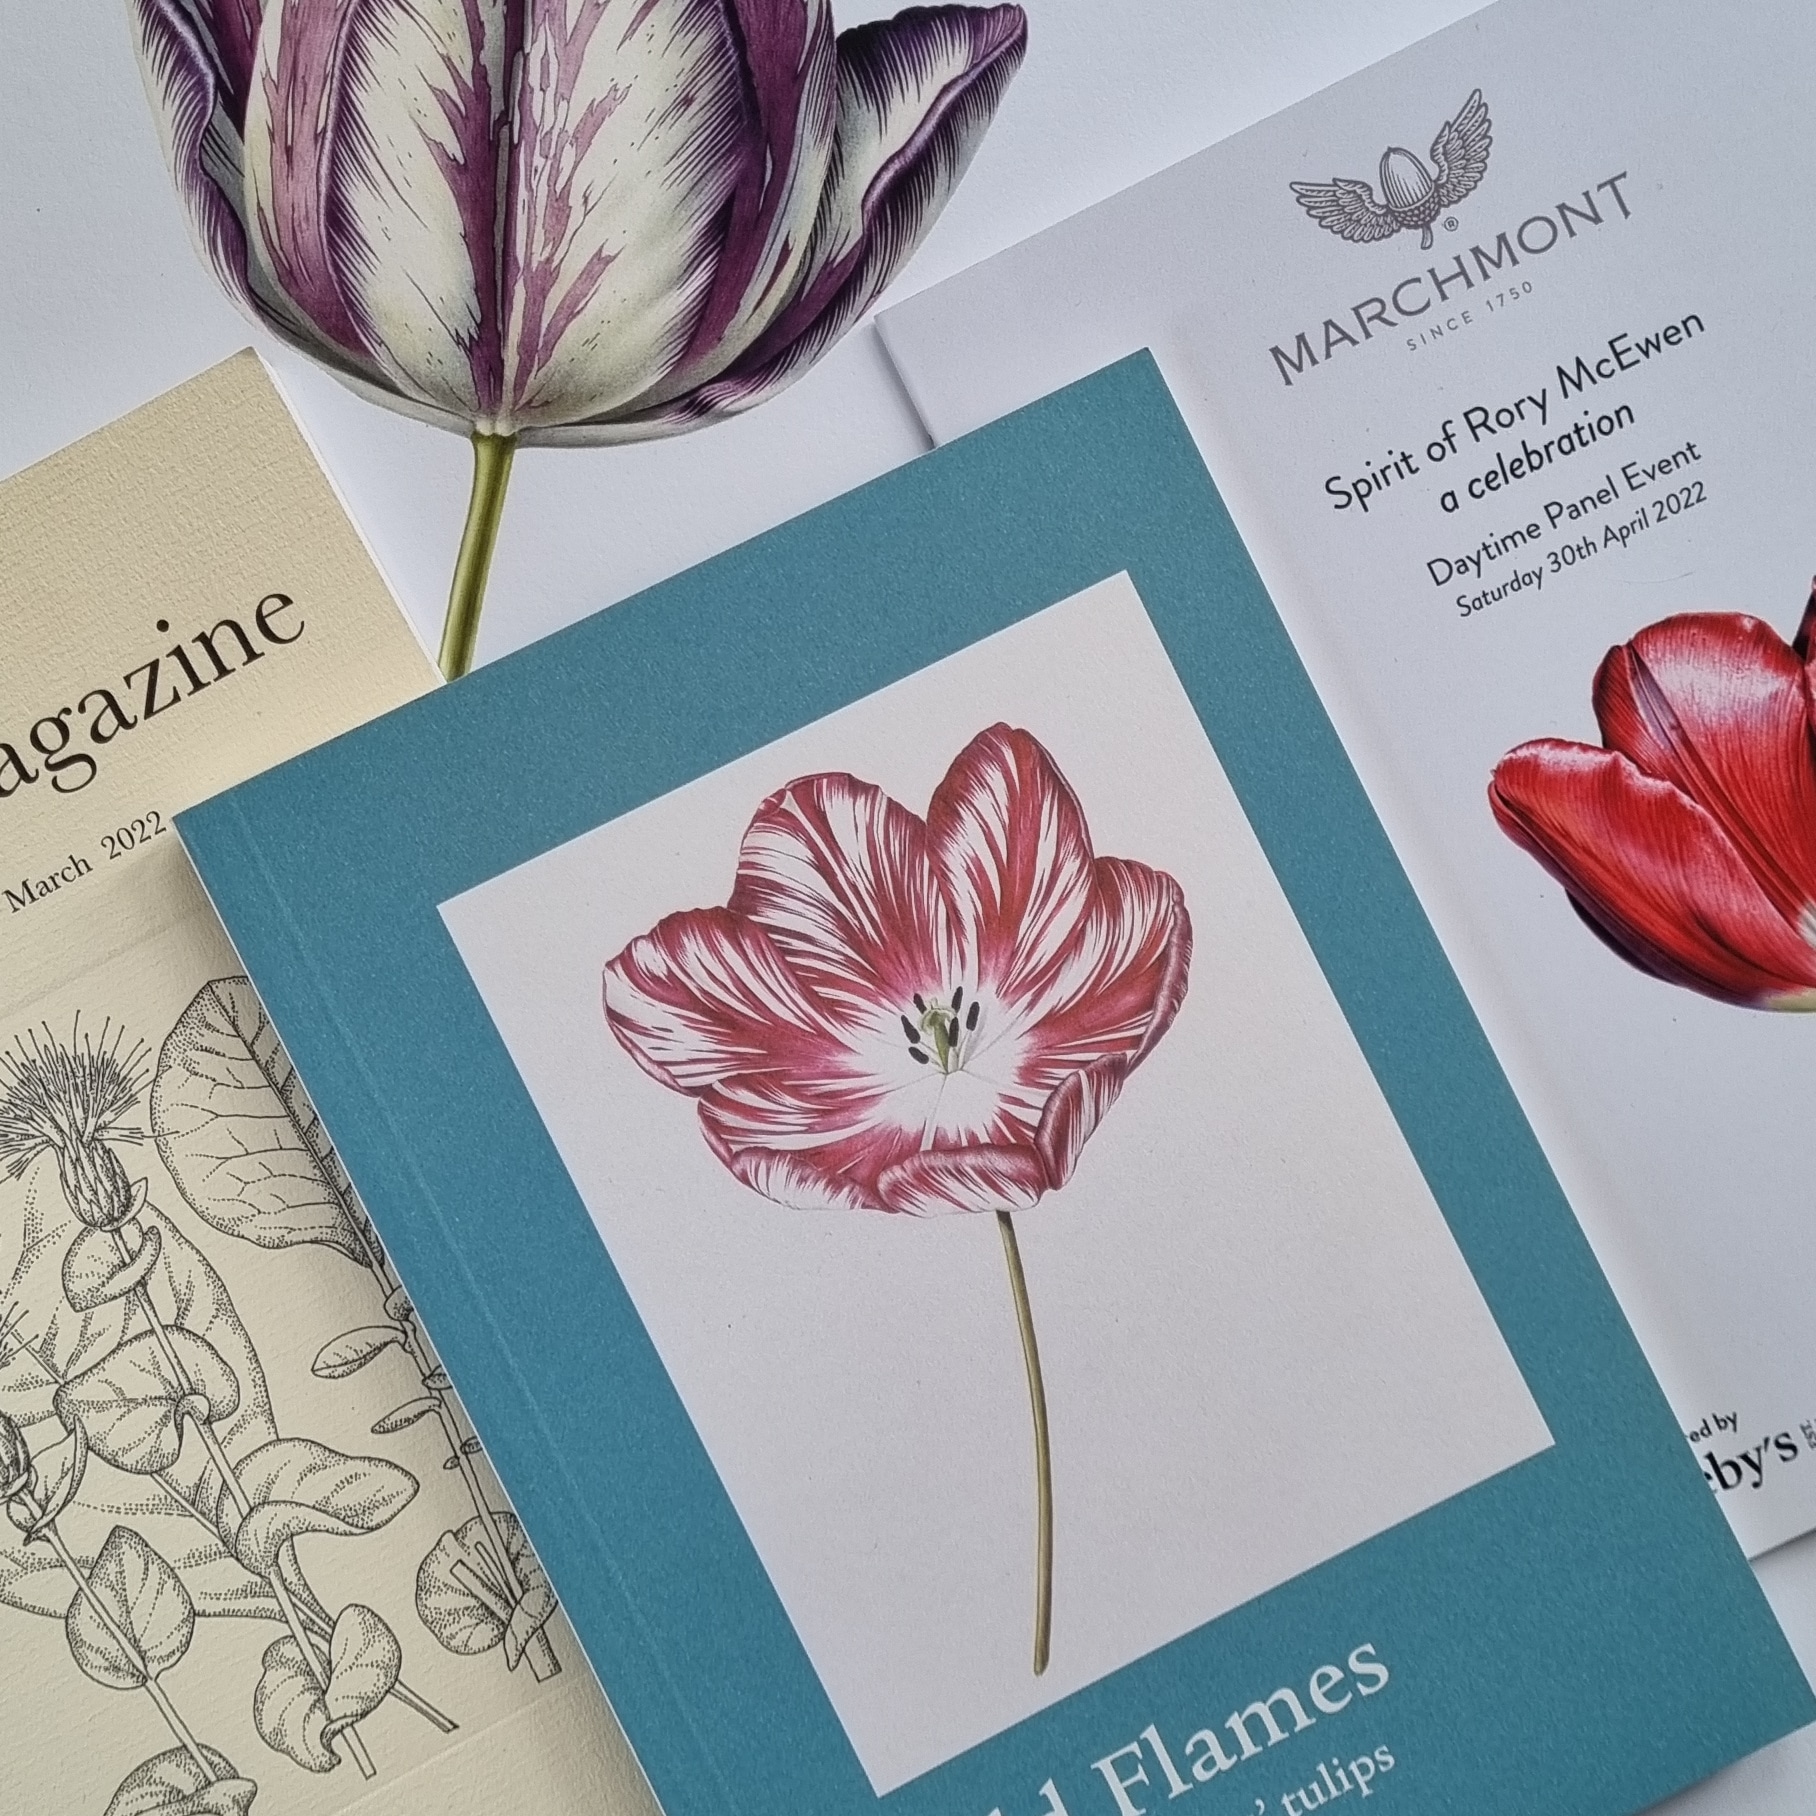 Spirit of Rory McEwen programme for the weekend, Old Flames, English Florists Tulips by the Wakefield & North of England Tulip Society, Curtis Botanical Magazine, March 2022, Tulip giclee print from the Estate of Rory McEwen